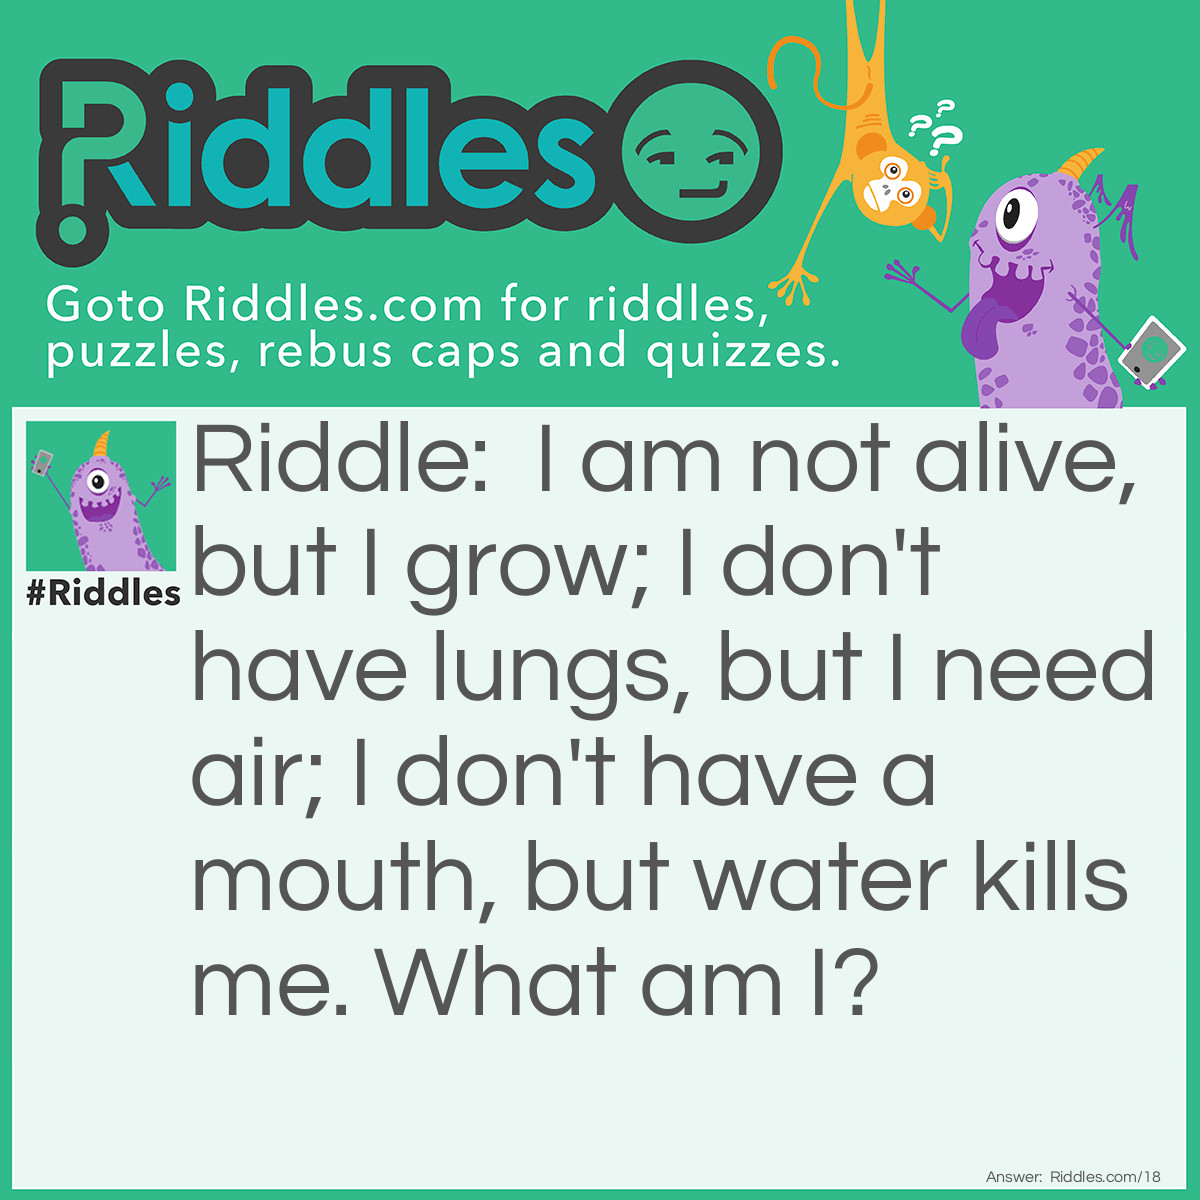 Riddle: I am not alive, but I grow; I don't have lungs, but I need air; I don't have a mouth, but water kills me. What am I? Answer: Fire.